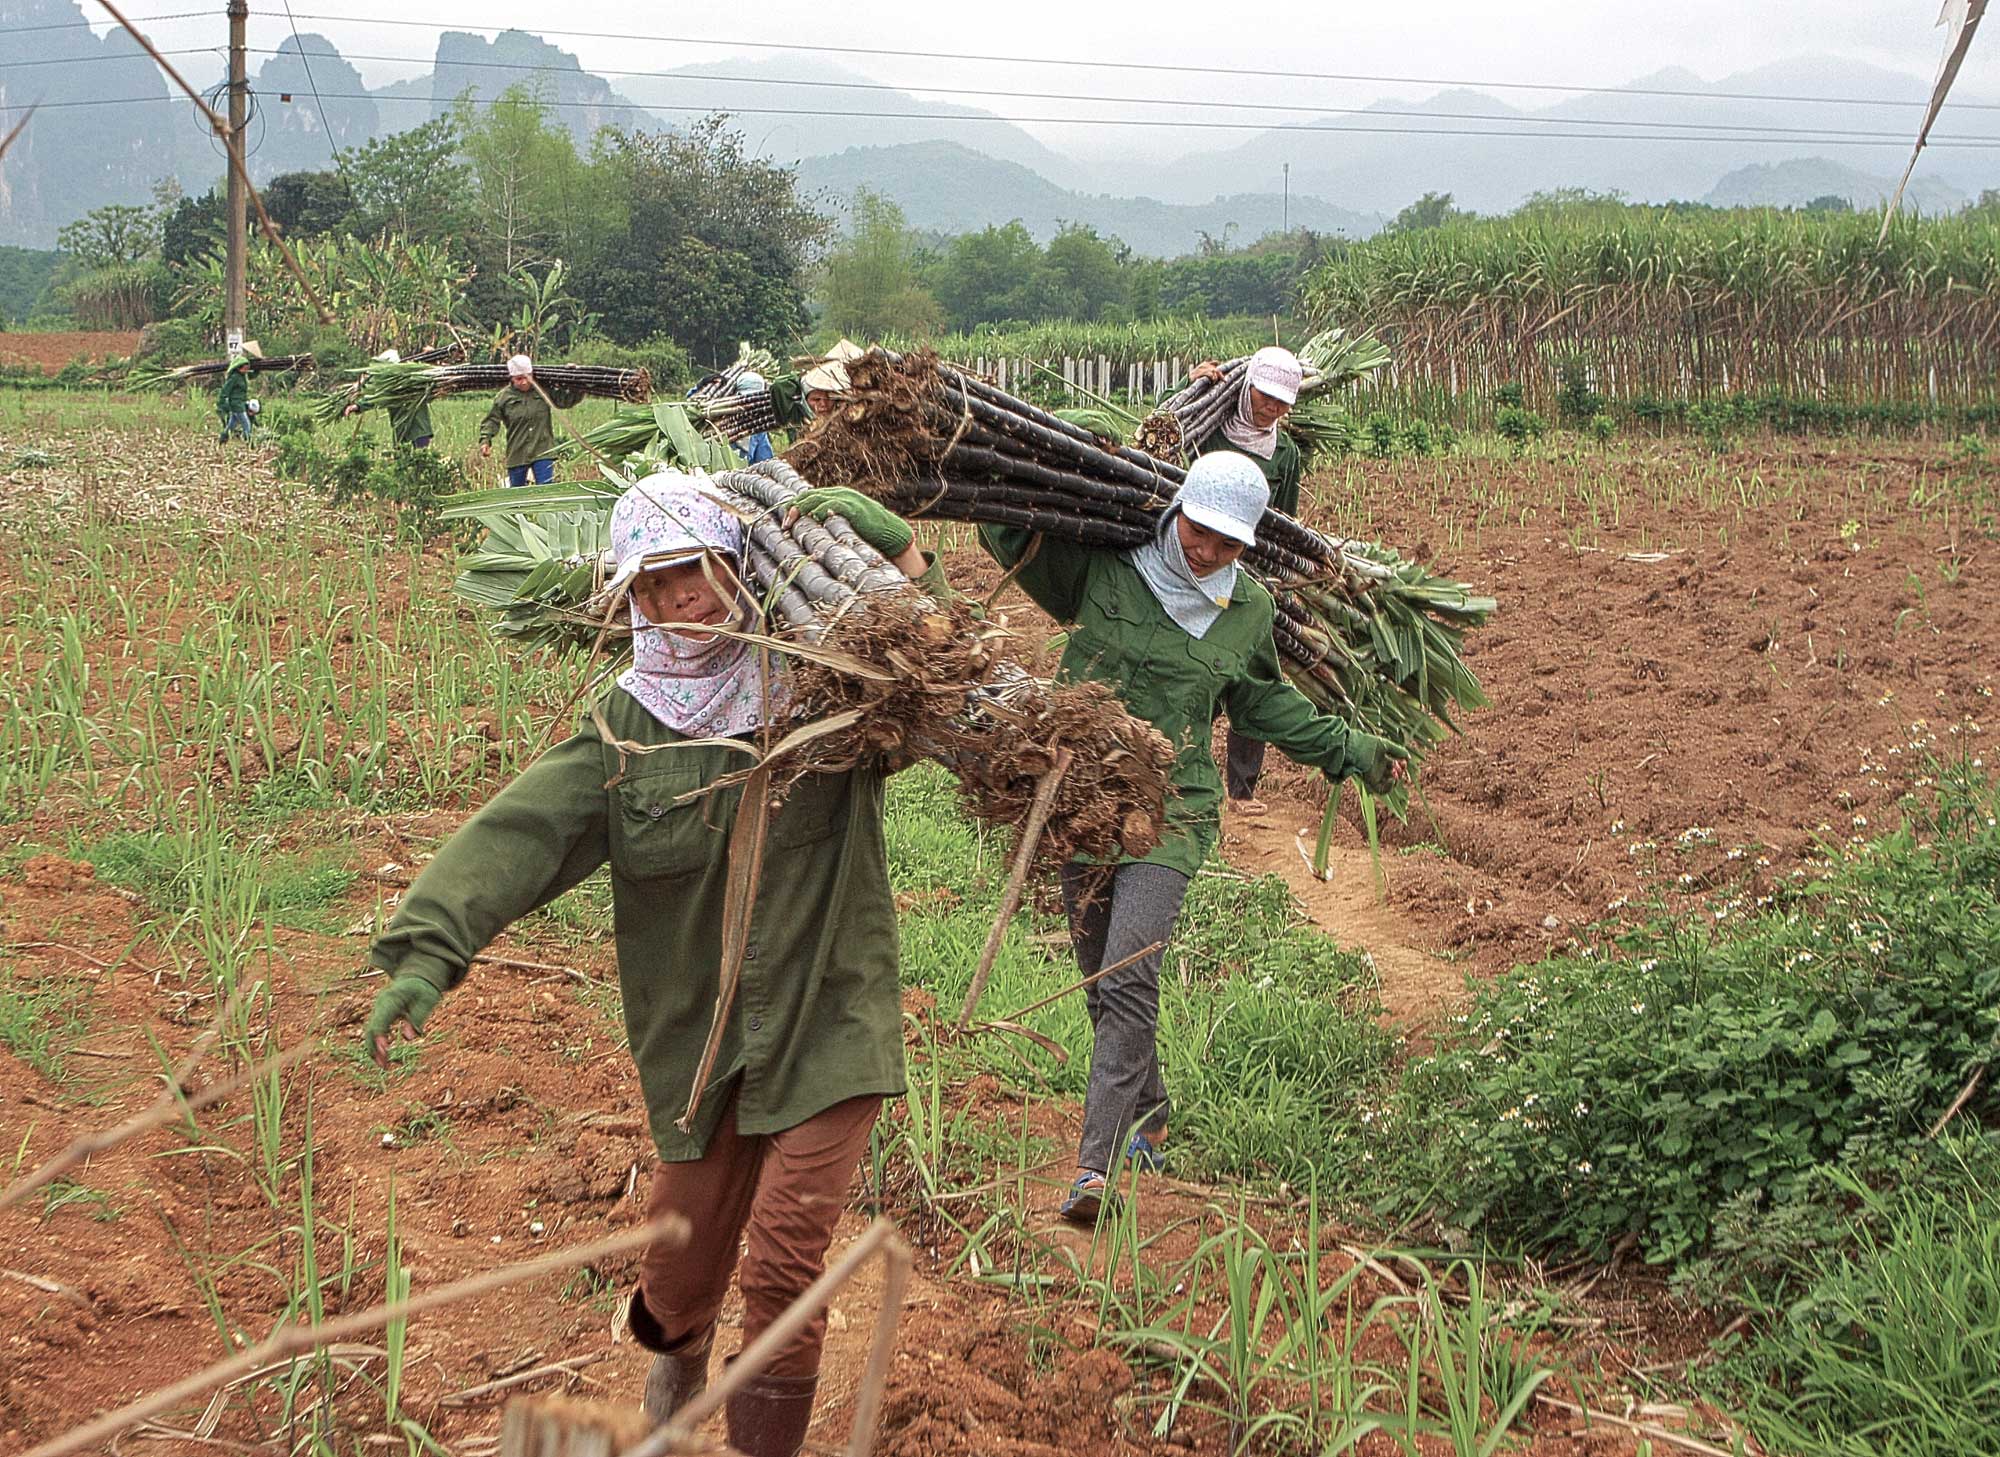 Photograph of women carrying bundles of harvest sugarcane in Vietnam. The photo shows women walking toward the camera in a line. Each women has bundles of sugarcane perched on one shoulder, which she holds in place with her arm. The women are dressed in long pants, long-sleeved shirts, head coverings that also cover their necks, and gloves.